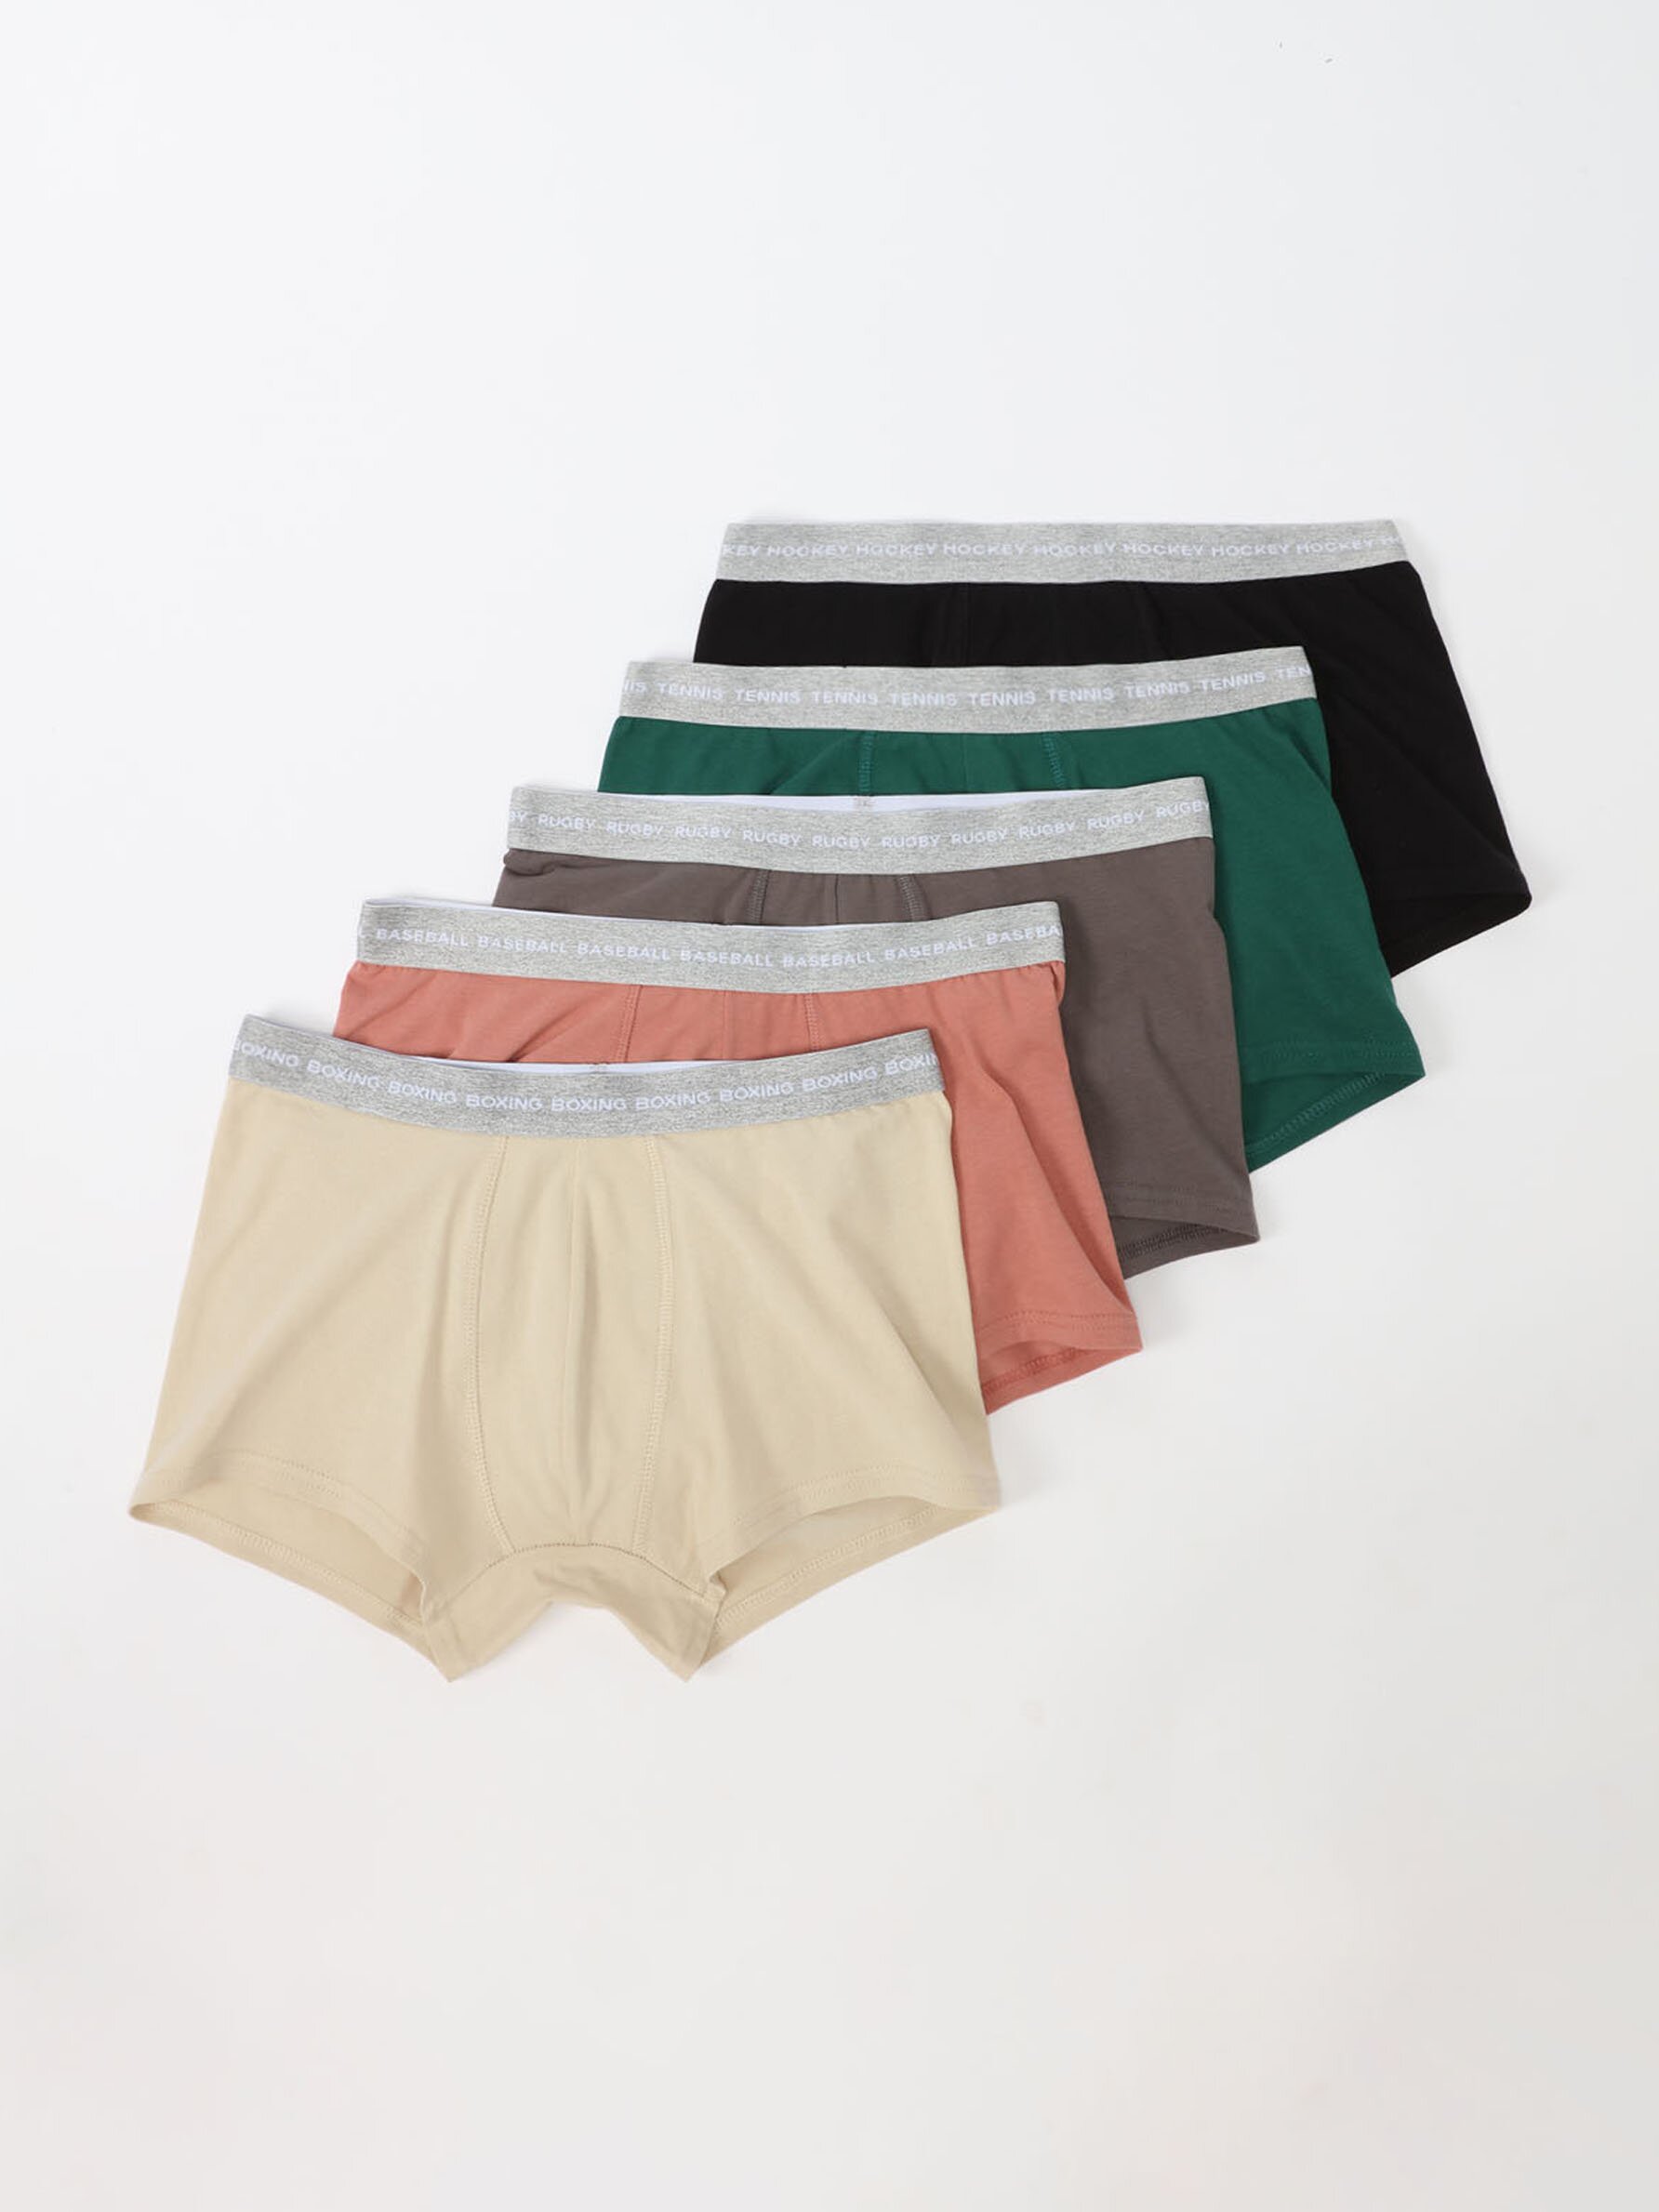 Pack of 5 pairs of plain boxers